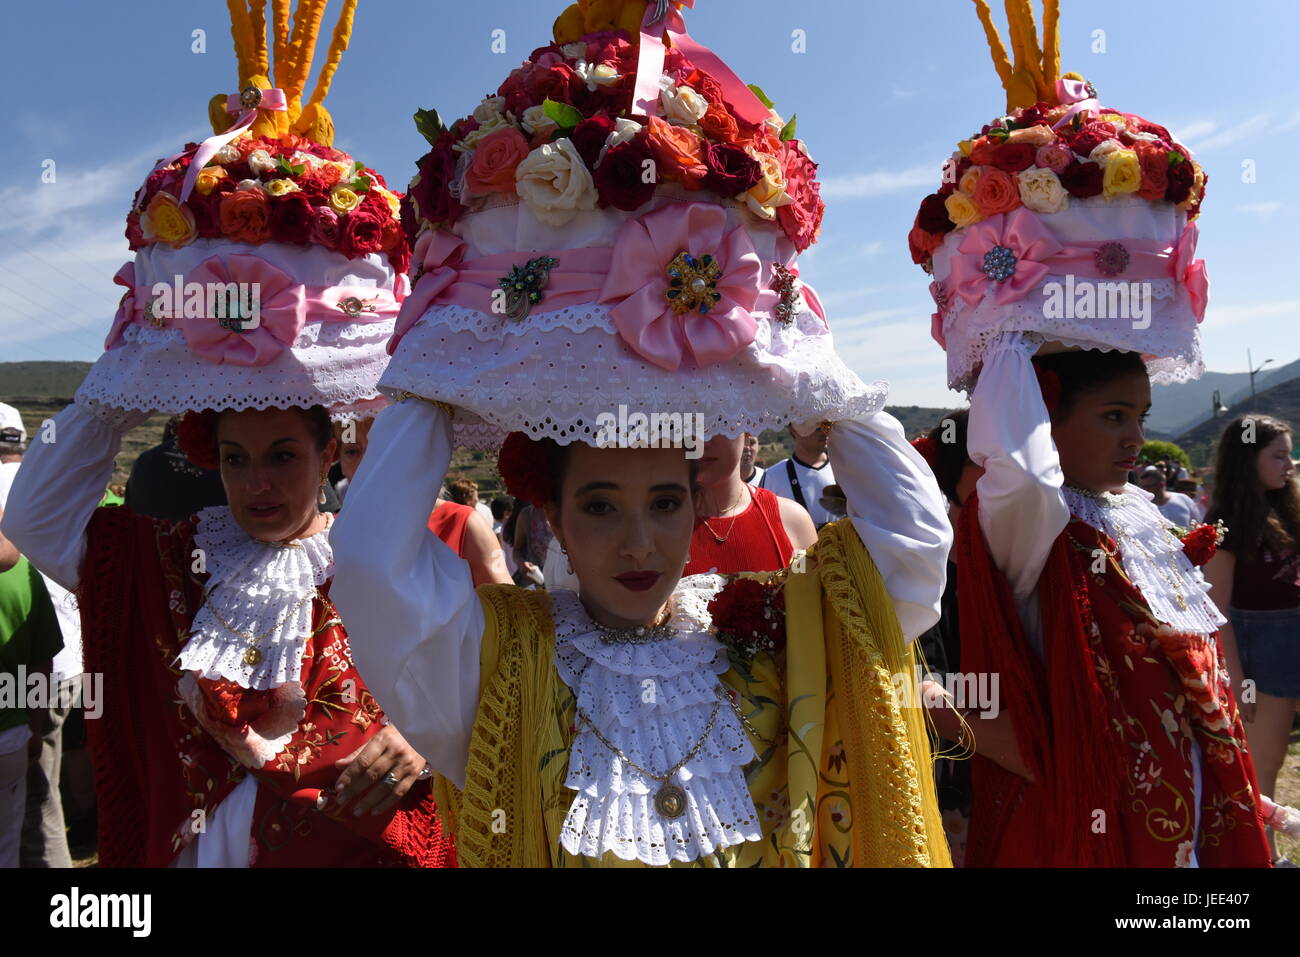 San Pedro Manrique, Spain. 24th June, 2017. A group of women called 'Móndidas' dressed in traditional costumes and wearing huge 'Cestaños', hats decorated with flowers and branches, covered with unleavened bread and colored with saffron, pictured during the celebration of the ancient tradition of 'La Descubierta' in San Pedro Manrique, northern Spain. Credit: Jorge Sanz/Pacific Press/Alamy Live News Stock Photo